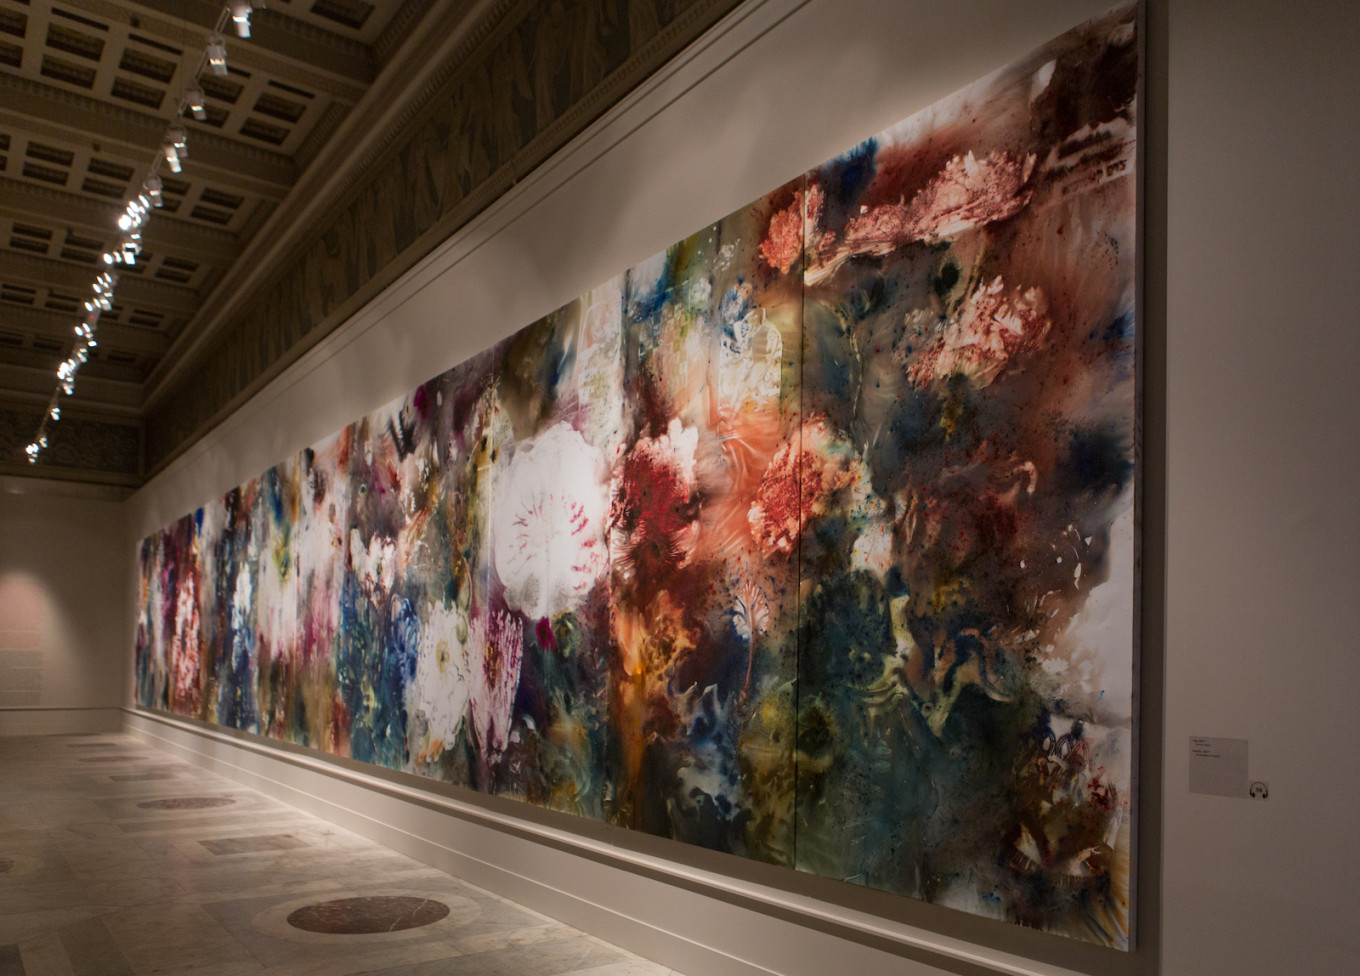 
					Installation view at The Pushkin Museum of Fine Arts, 2017 of Garden, 2017; gunpowder on canvas; 3 x 20 m overall					 					Photo by Lin King, courtesy Cai Studio				